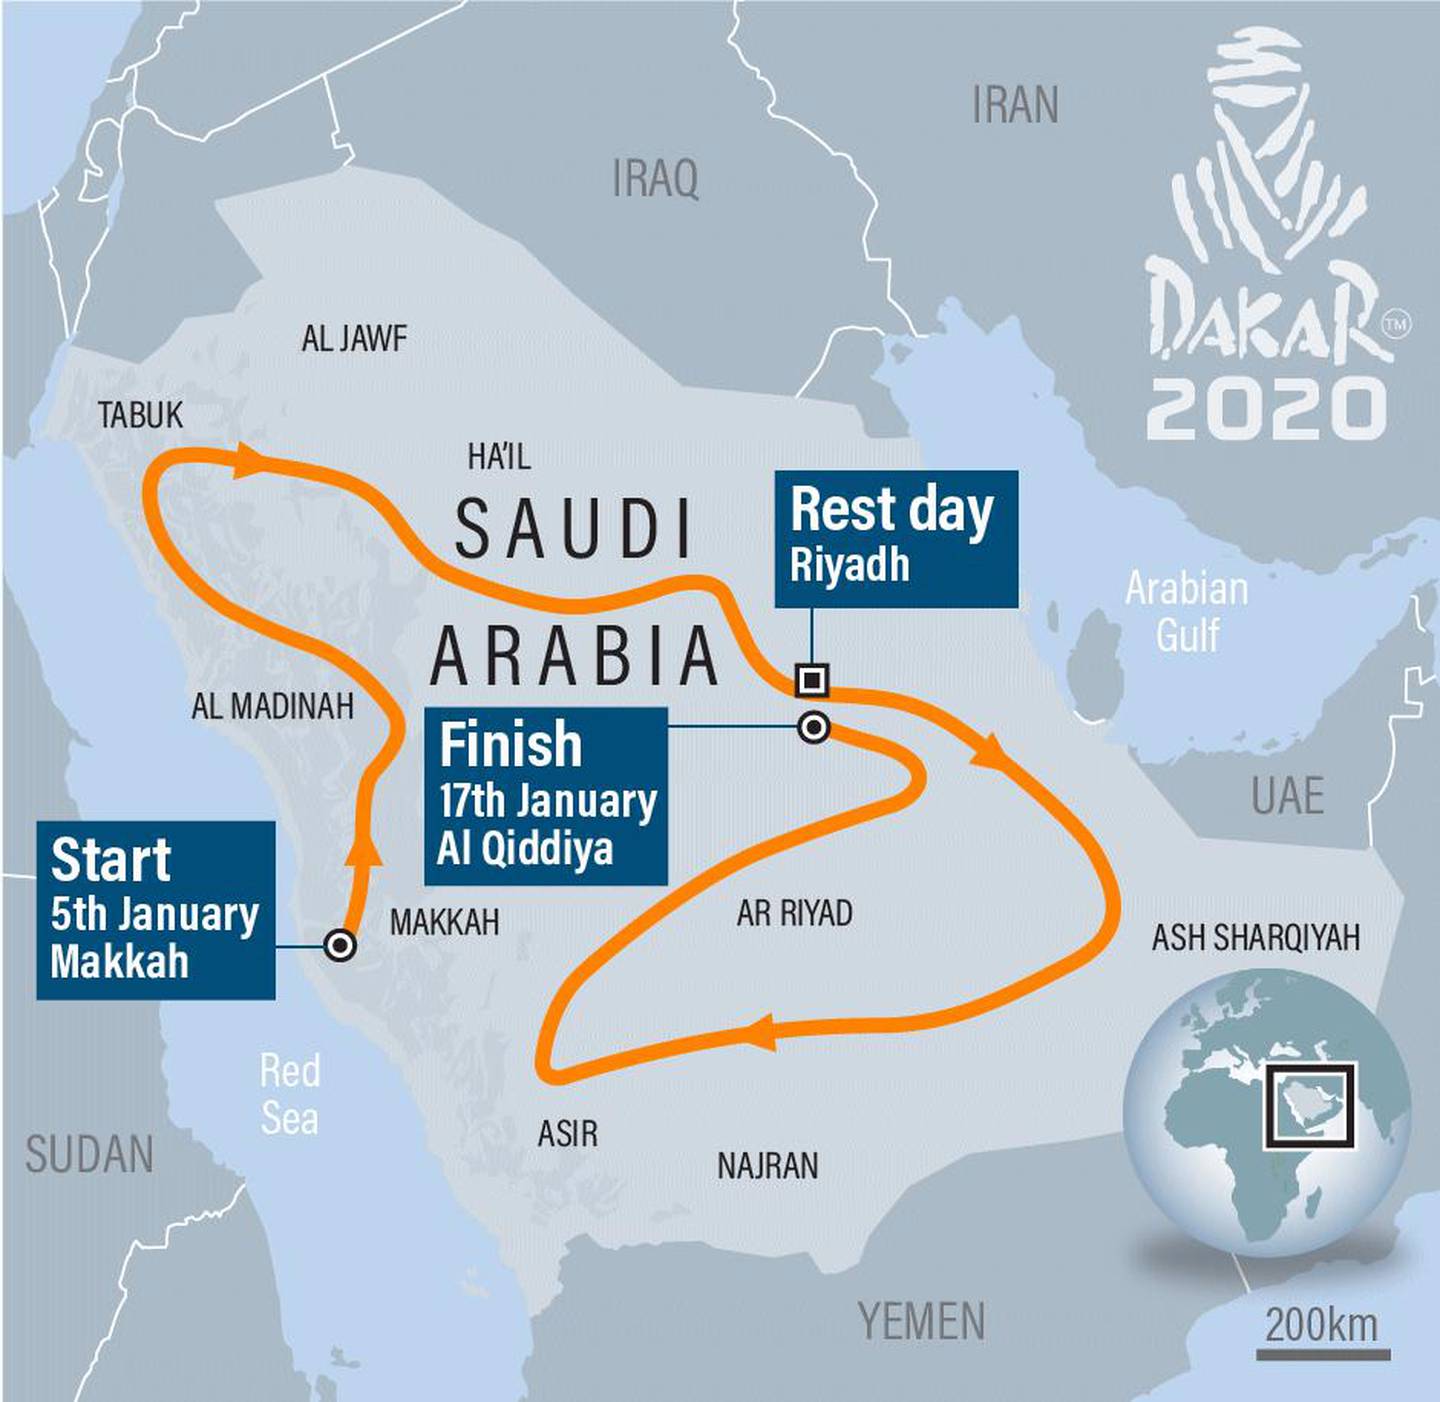 The route for the Dakar Saudi Arabia Rally route. The National